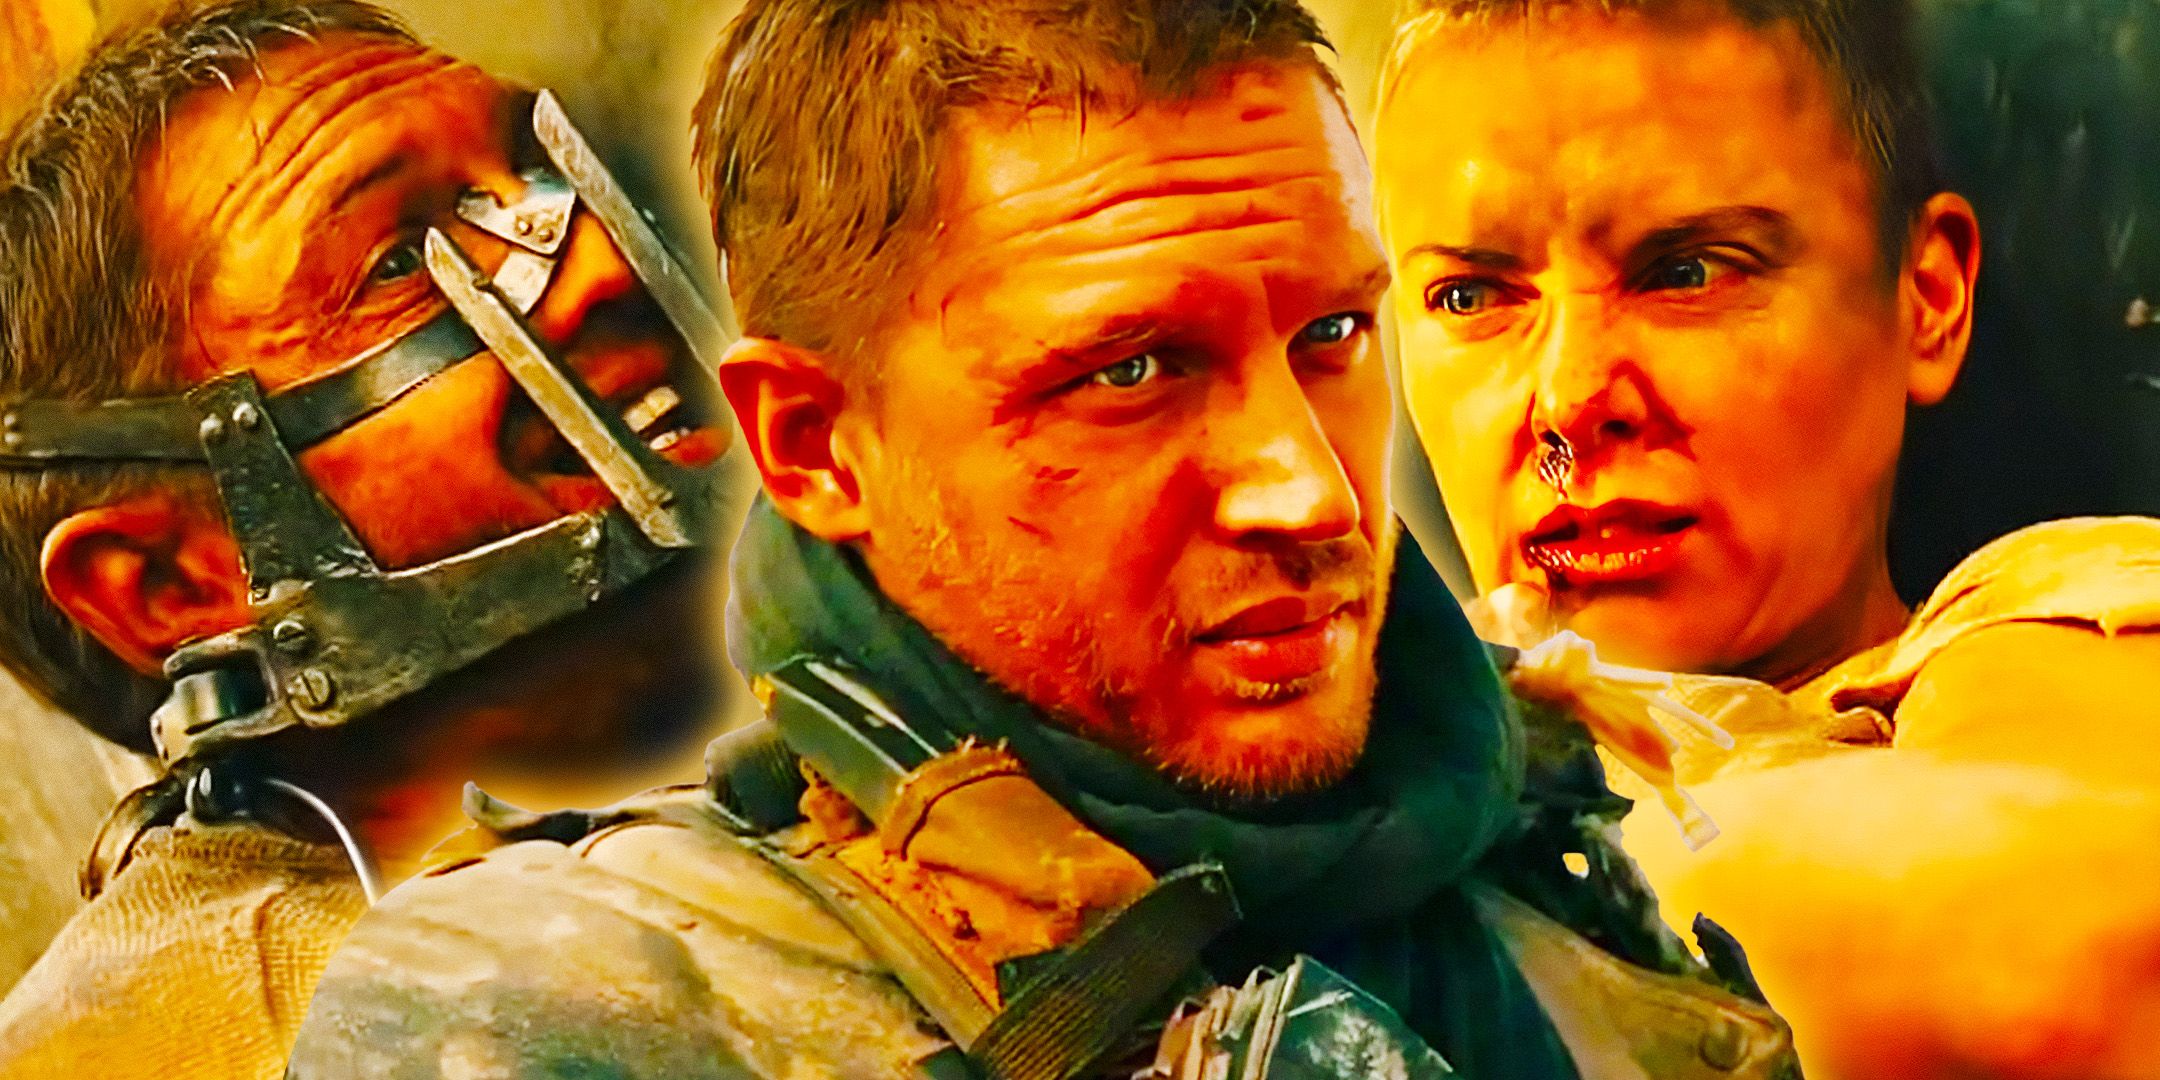 Every upcoming Mad Max movie in development